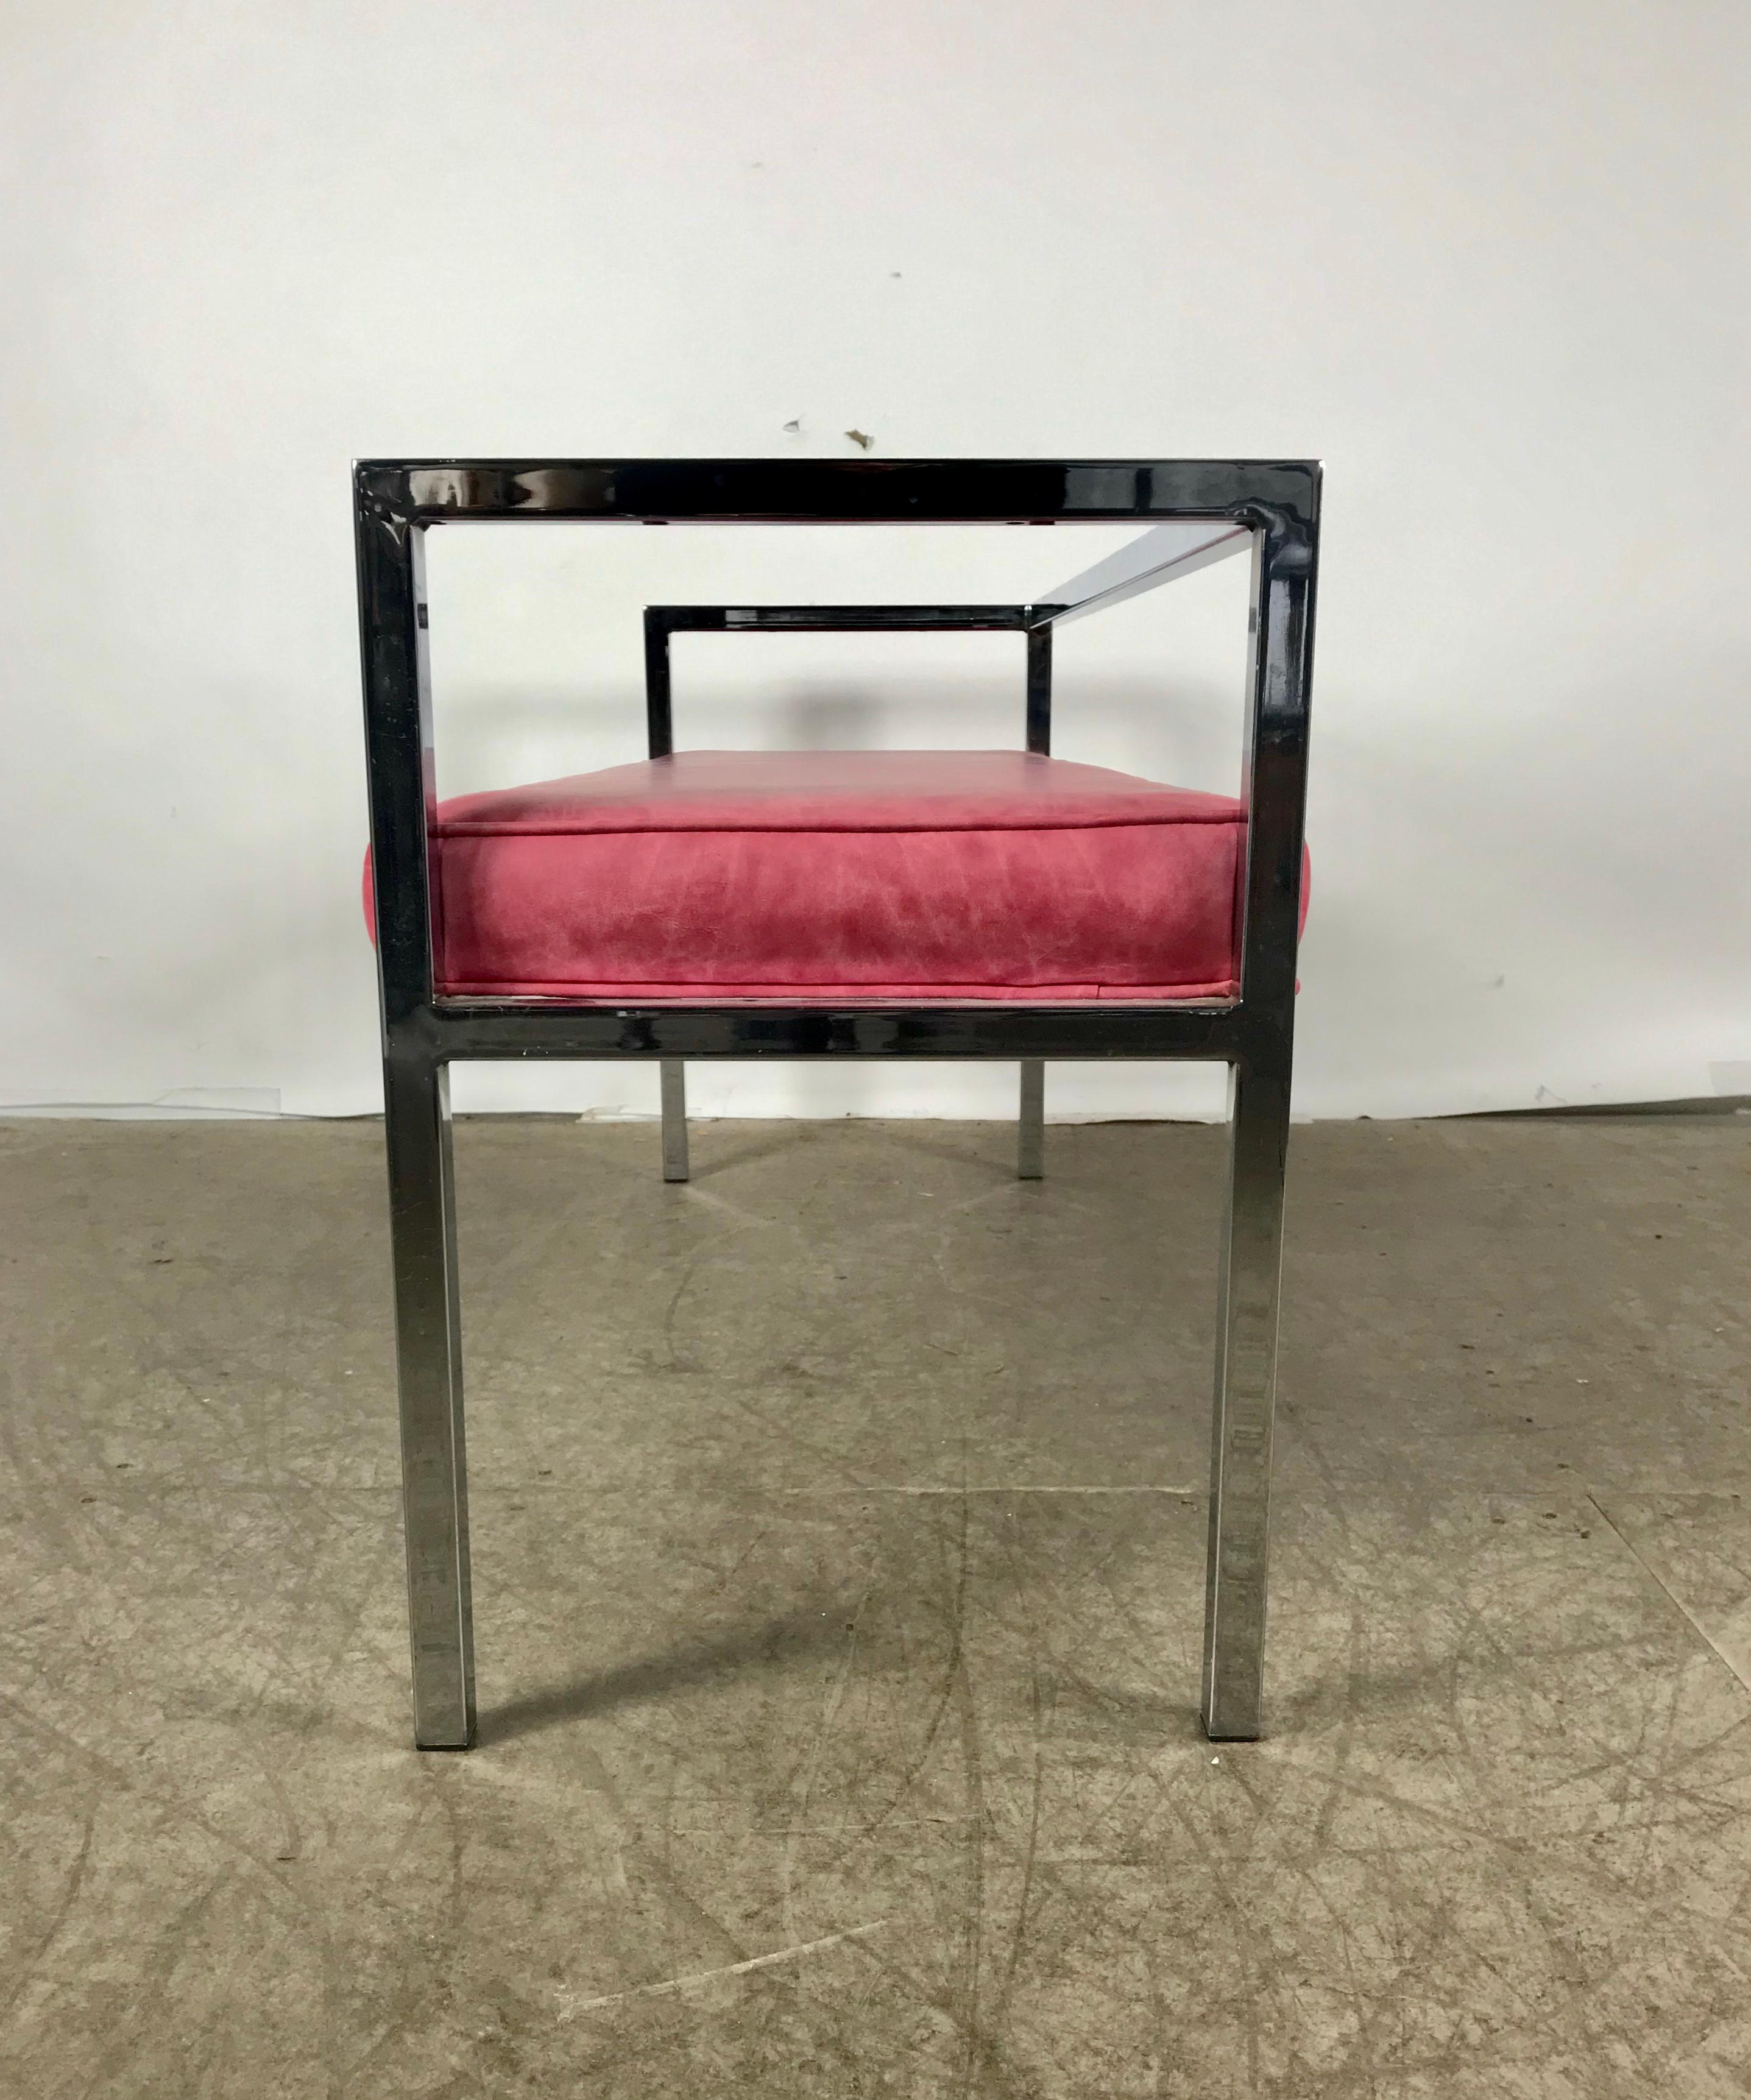 Stunning geometric even arm chrome bench after Milo Boughman, Classic 1960s design, retains original coral or pink Naugahyde upholstered seat.